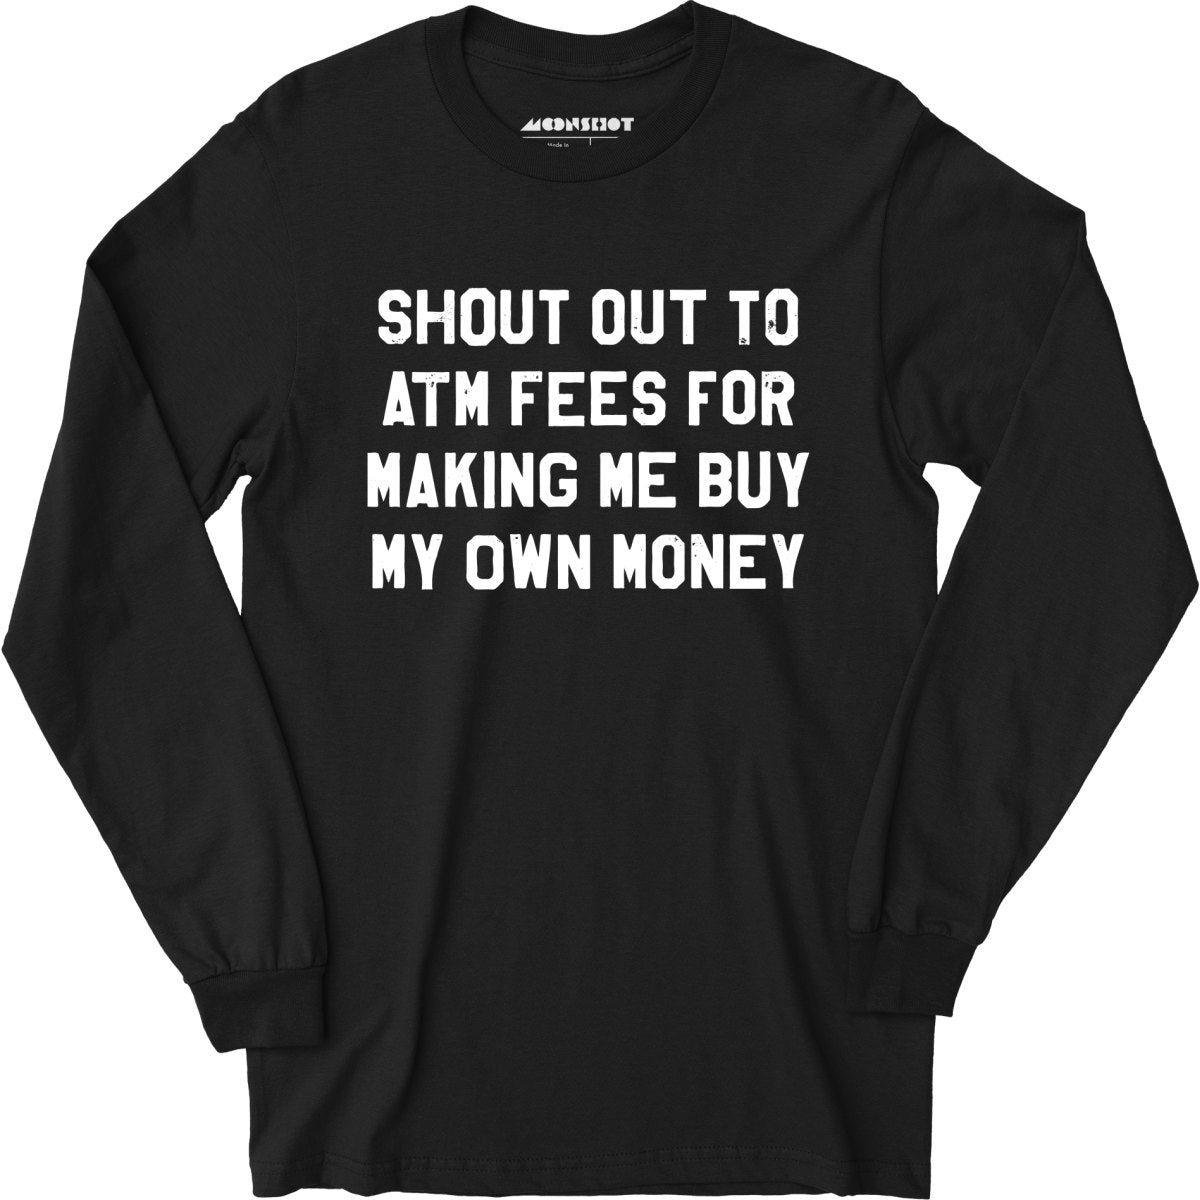 Shout Out to ATM Fees for Making Me Buy My Own Money - Long Sleeve T-Shirt